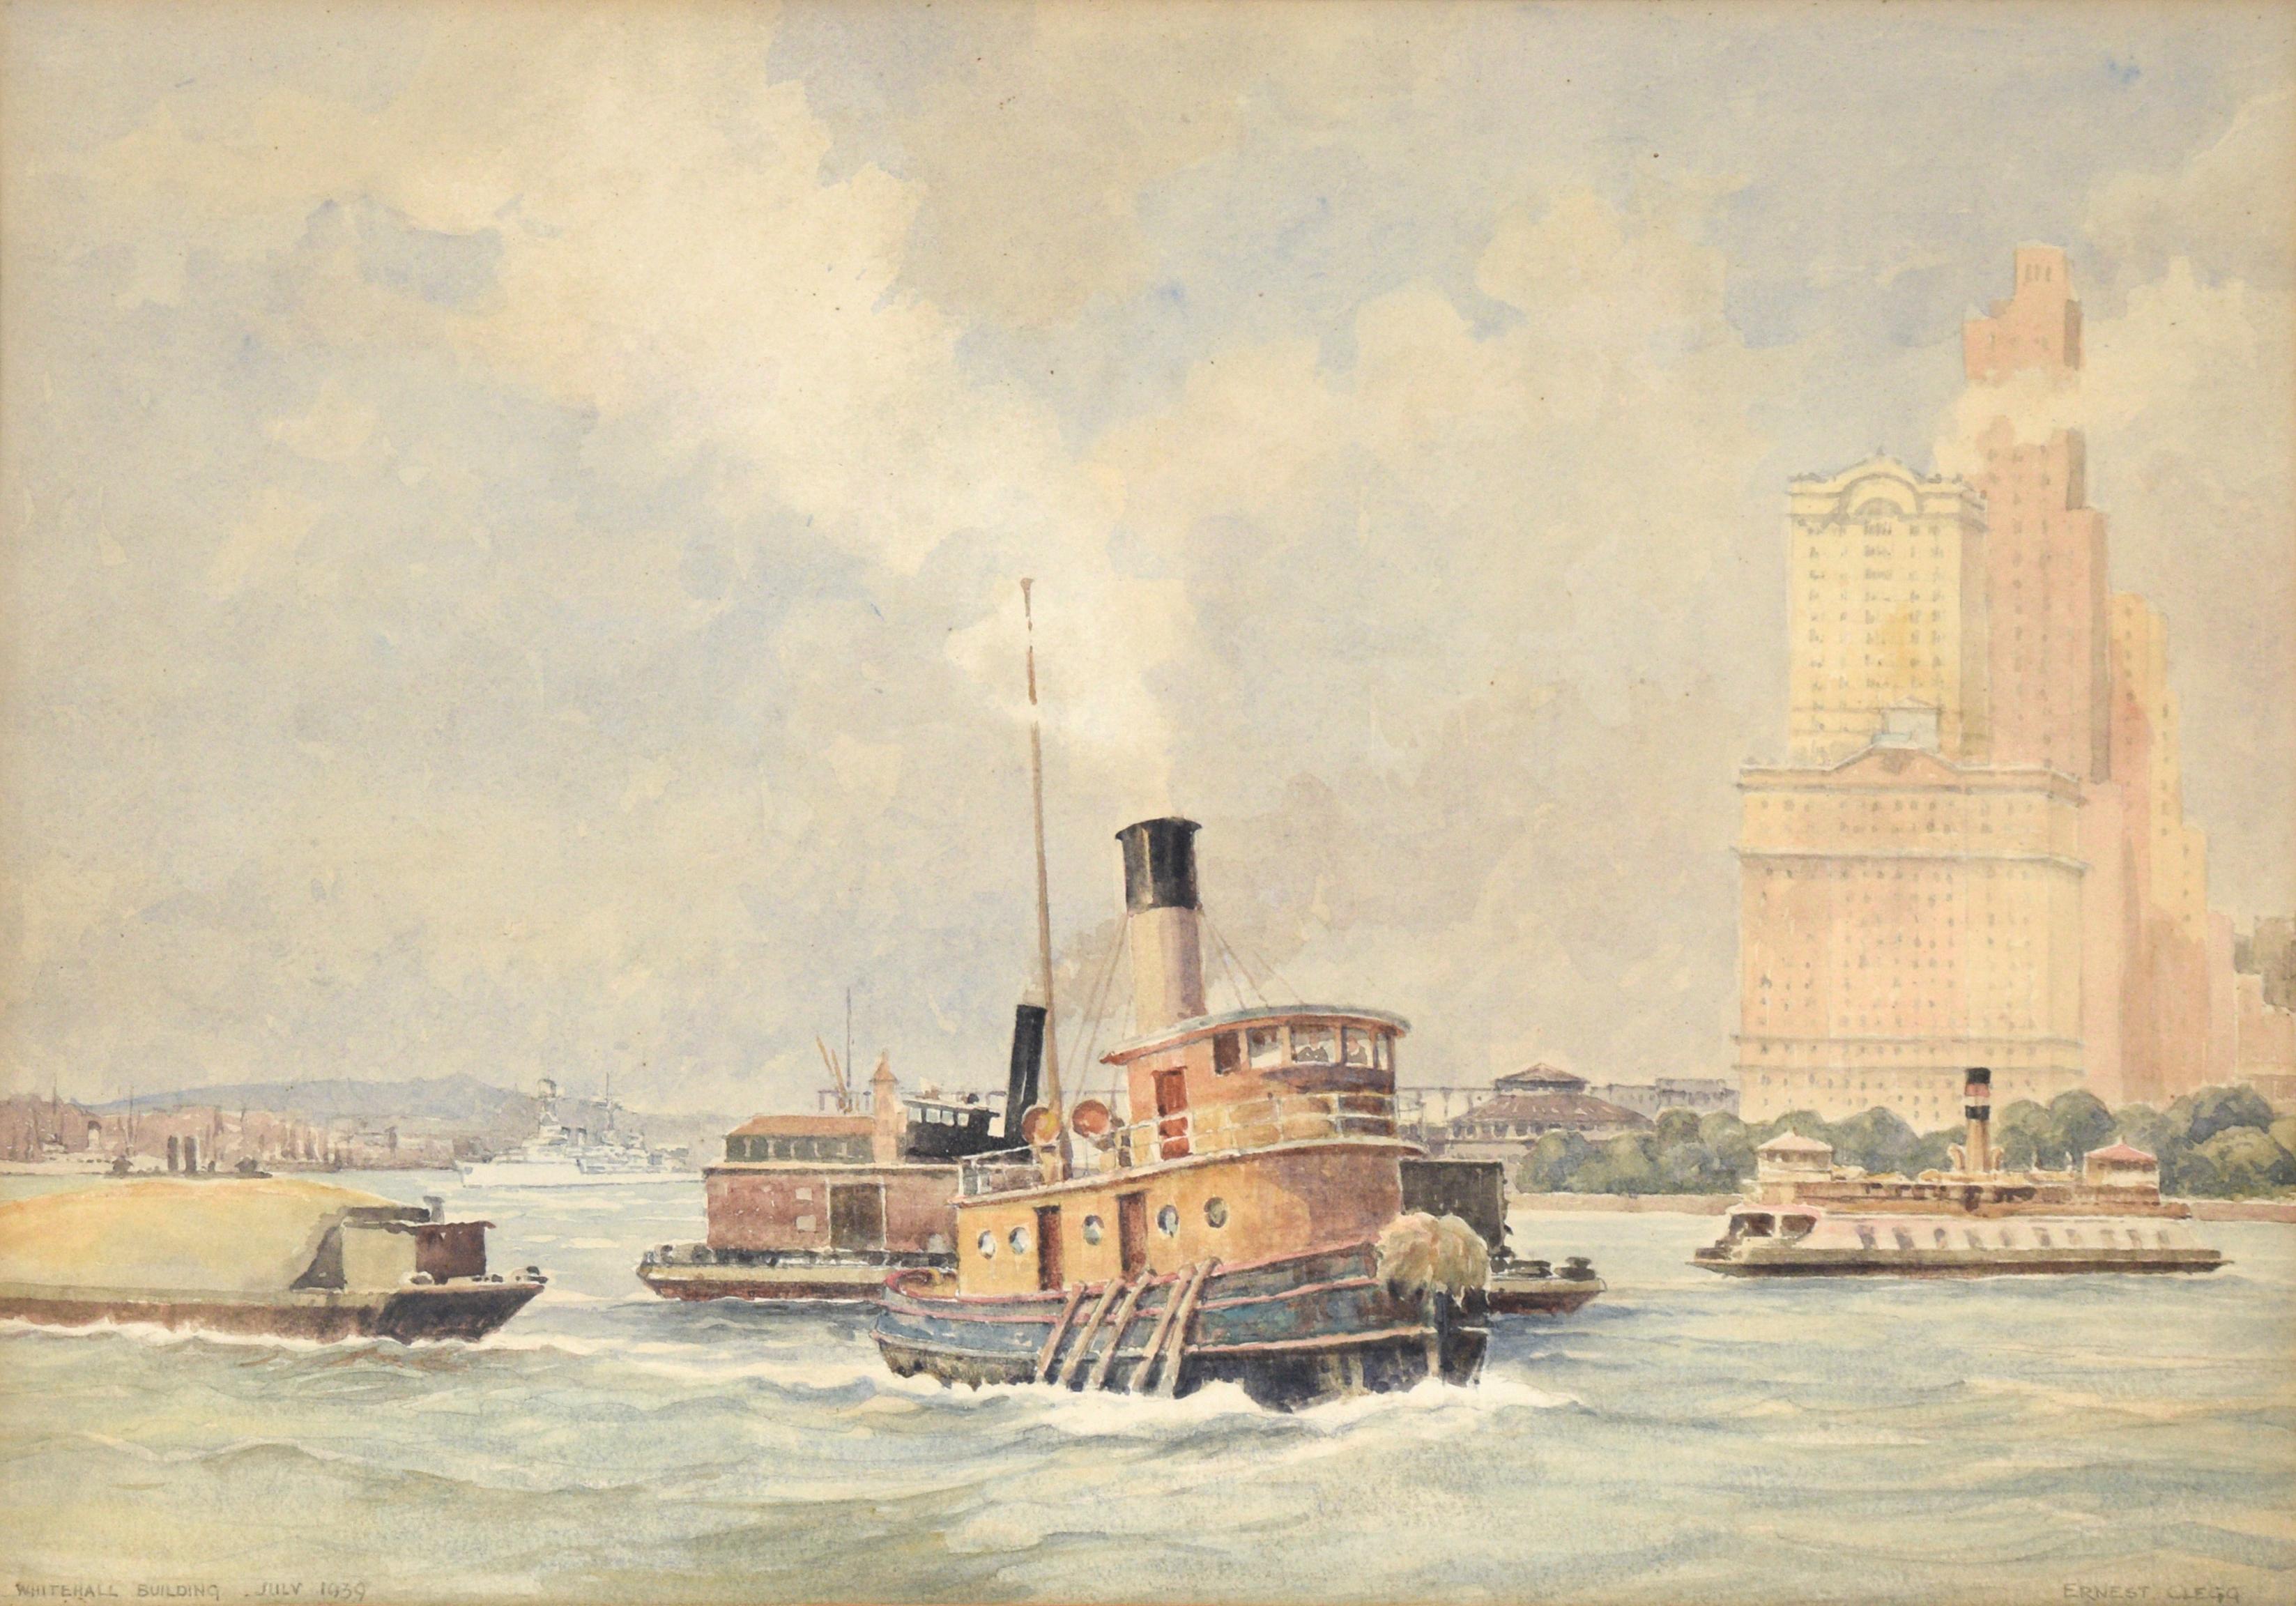 Whitehall Building, July 1939 - Harbor Seascape with Tugboat in Watercolor - Painting by Ernest Clegg